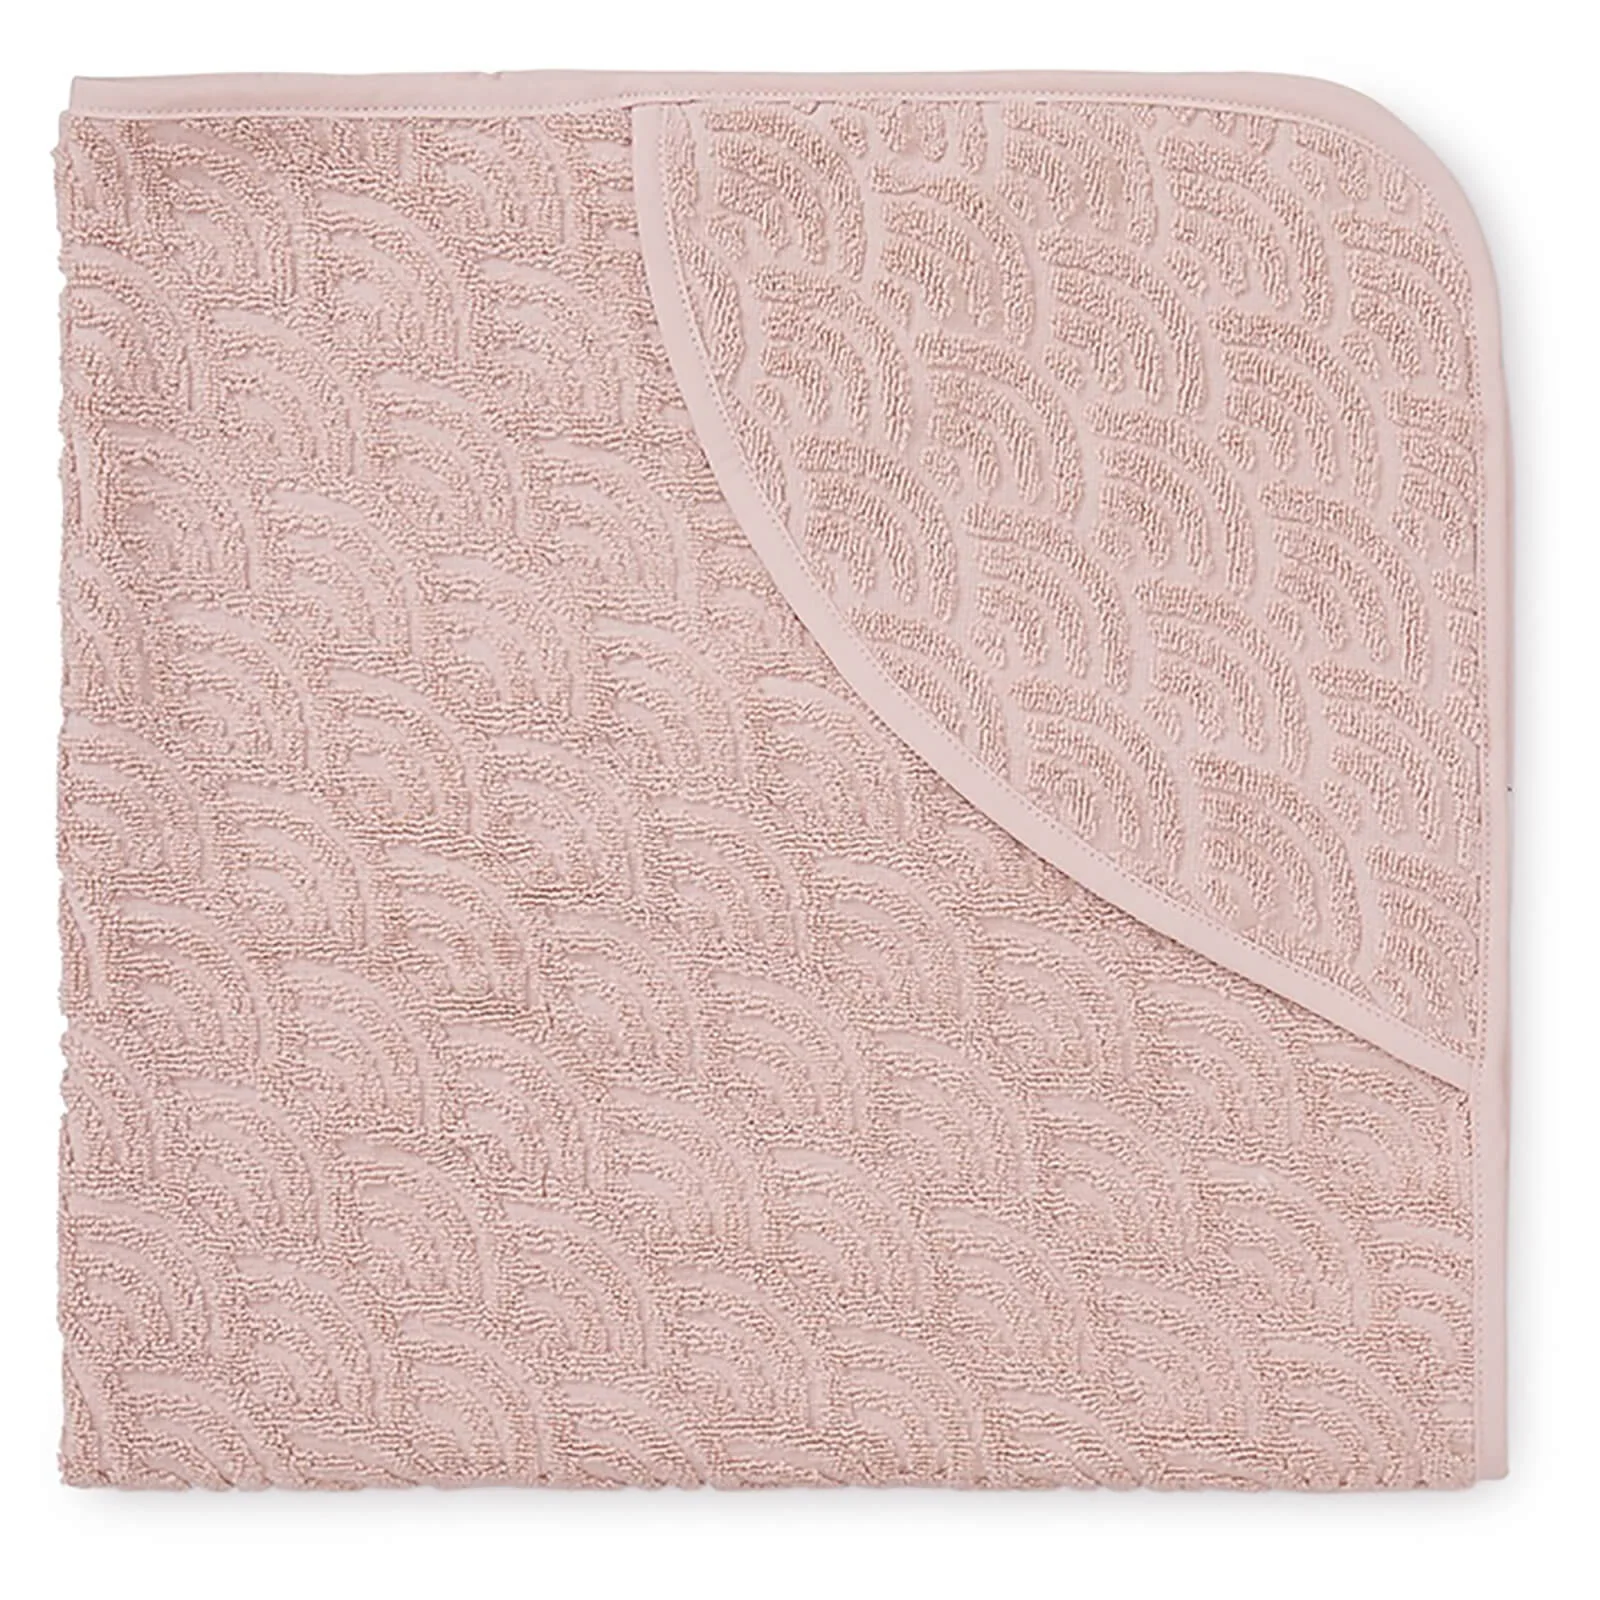 Cam Cam Hooded Baby Towel - Blossom Pink Image 1